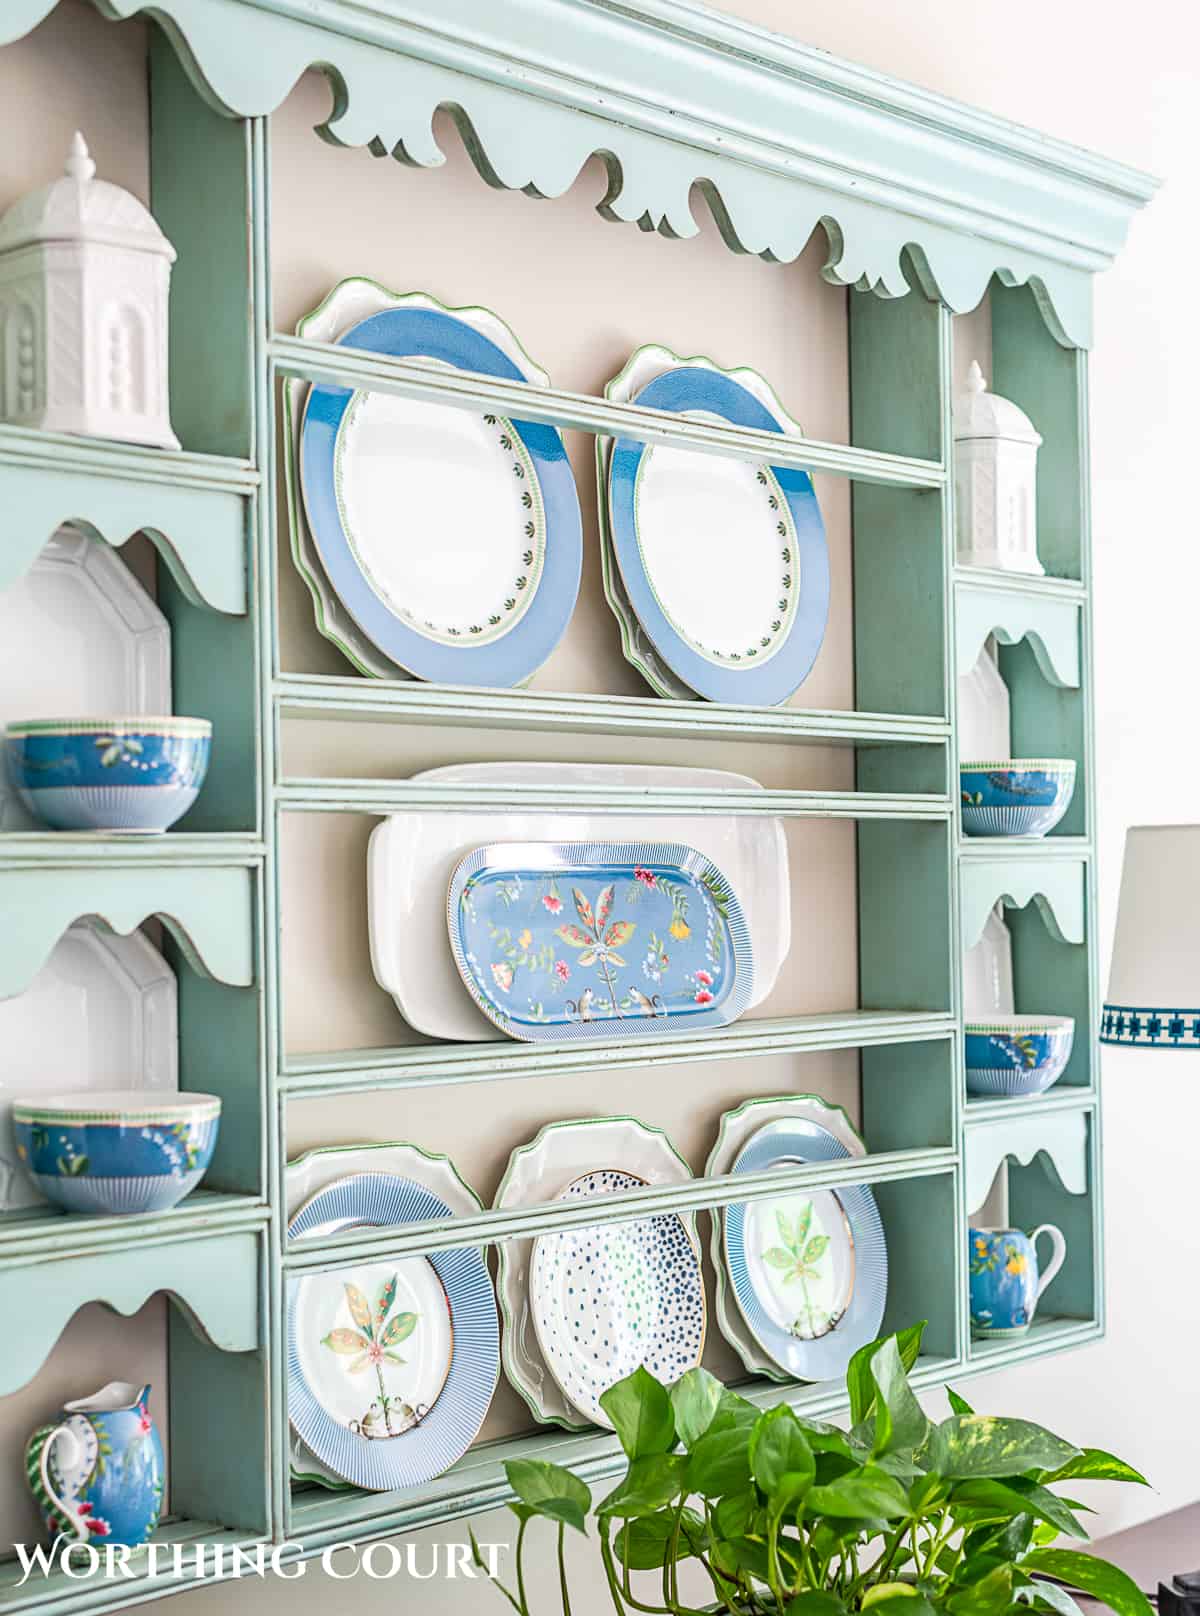 Studio A Plate Stand  Plate stands, Decorative plates, Decorative plates  and bowls